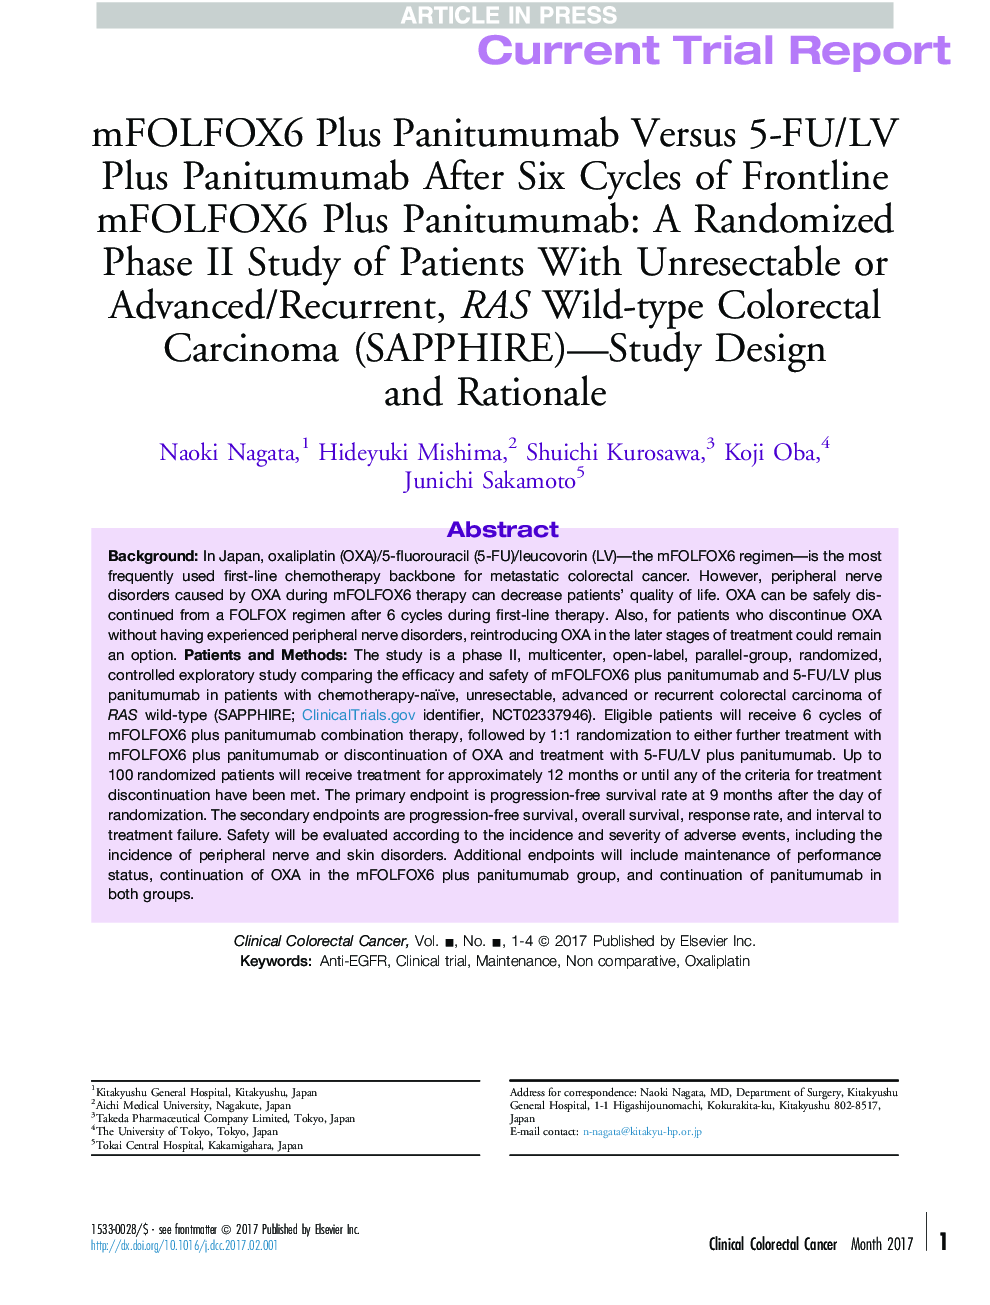 mFOLFOX6 Plus Panitumumab Versus 5-FU/LV Plus Panitumumab After Six Cycles of Frontline mFOLFOX6 Plus Panitumumab: A Randomized Phase II Study of Patients With Unresectable or Advanced/Recurrent, RAS Wild-type Colorectal Carcinoma (SAPPHIRE)-Study Design 